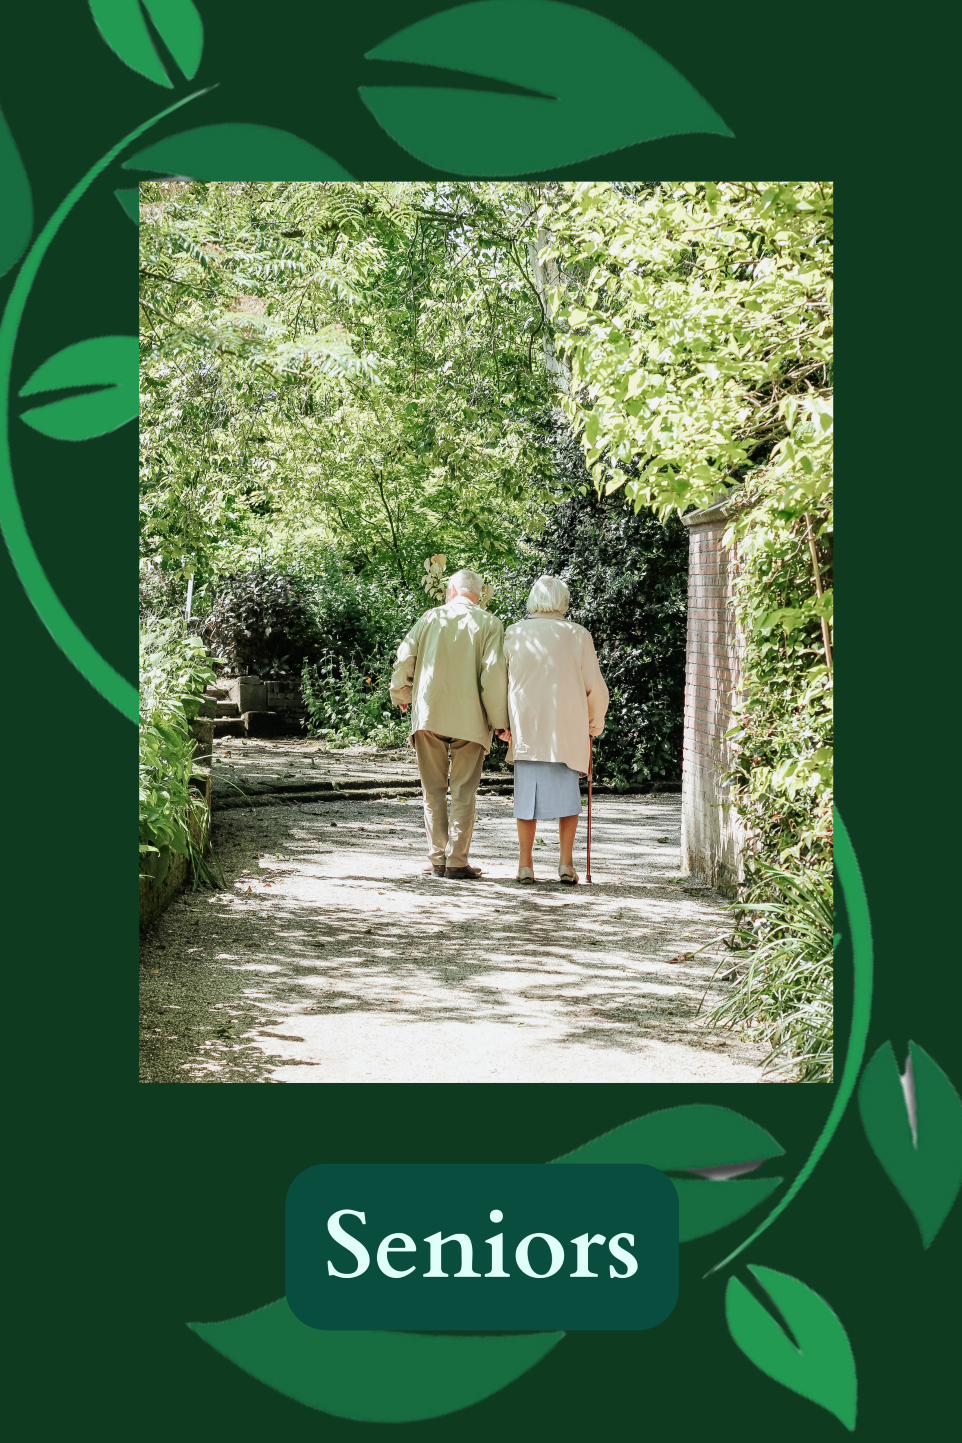 A male and female elderly couple, backs turned walking away into a forest